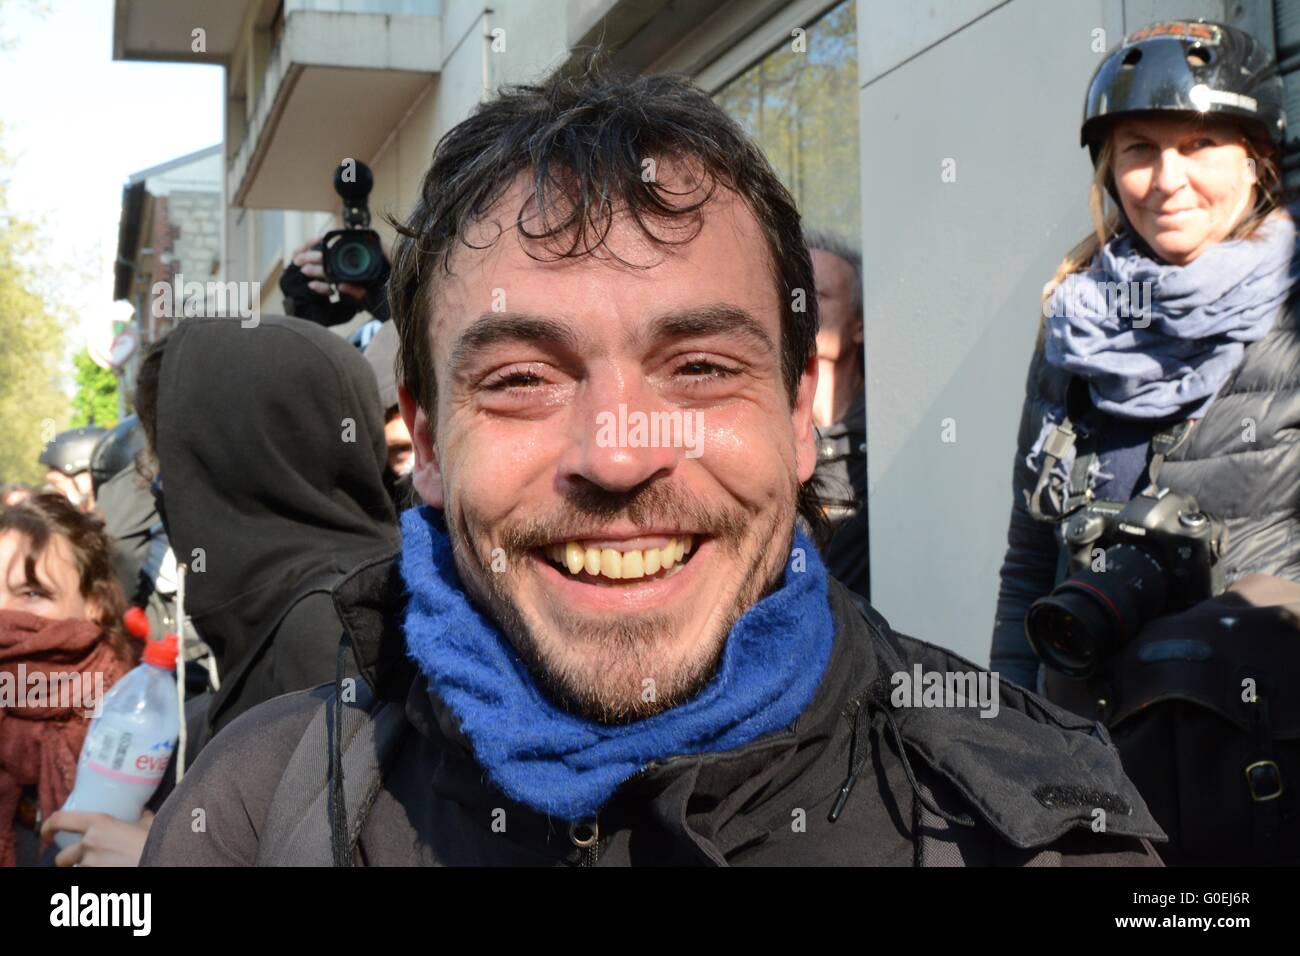 Paris, France. 1 May 2016. Protester smiles after being hit with teargas in Paris. Credit: Marc Ward/Alamy Live News Stock Photo